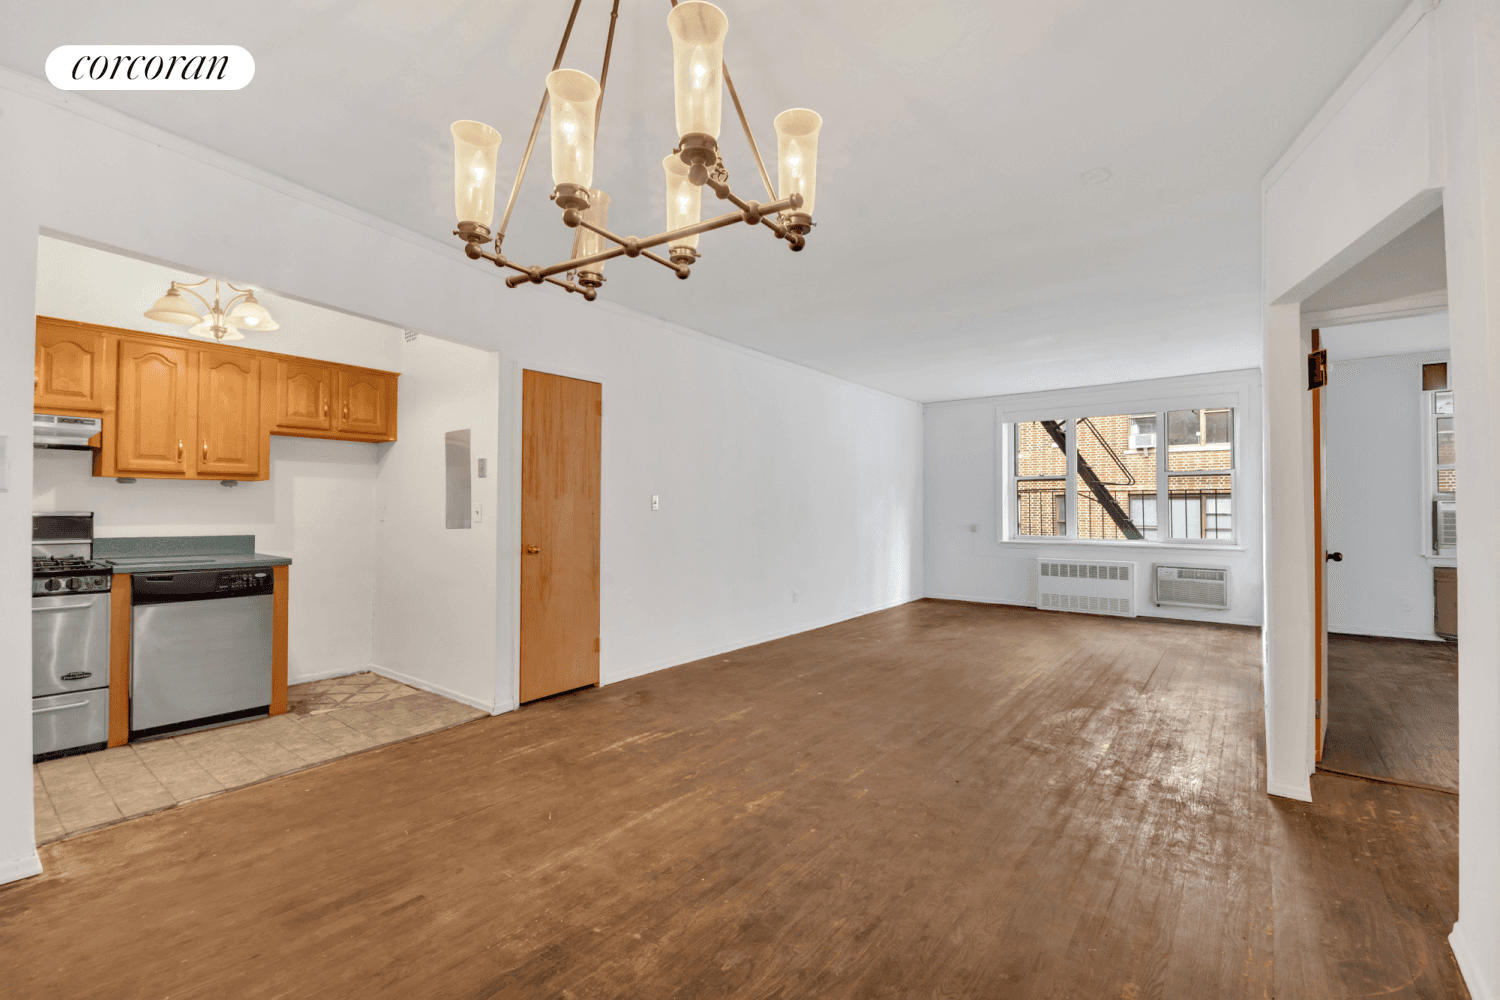 Bring your architect ! Located on a prime Upper West Side block this spacious, and airy, one bedroom, one bath apartment is waiting for your unique vision to create your ...